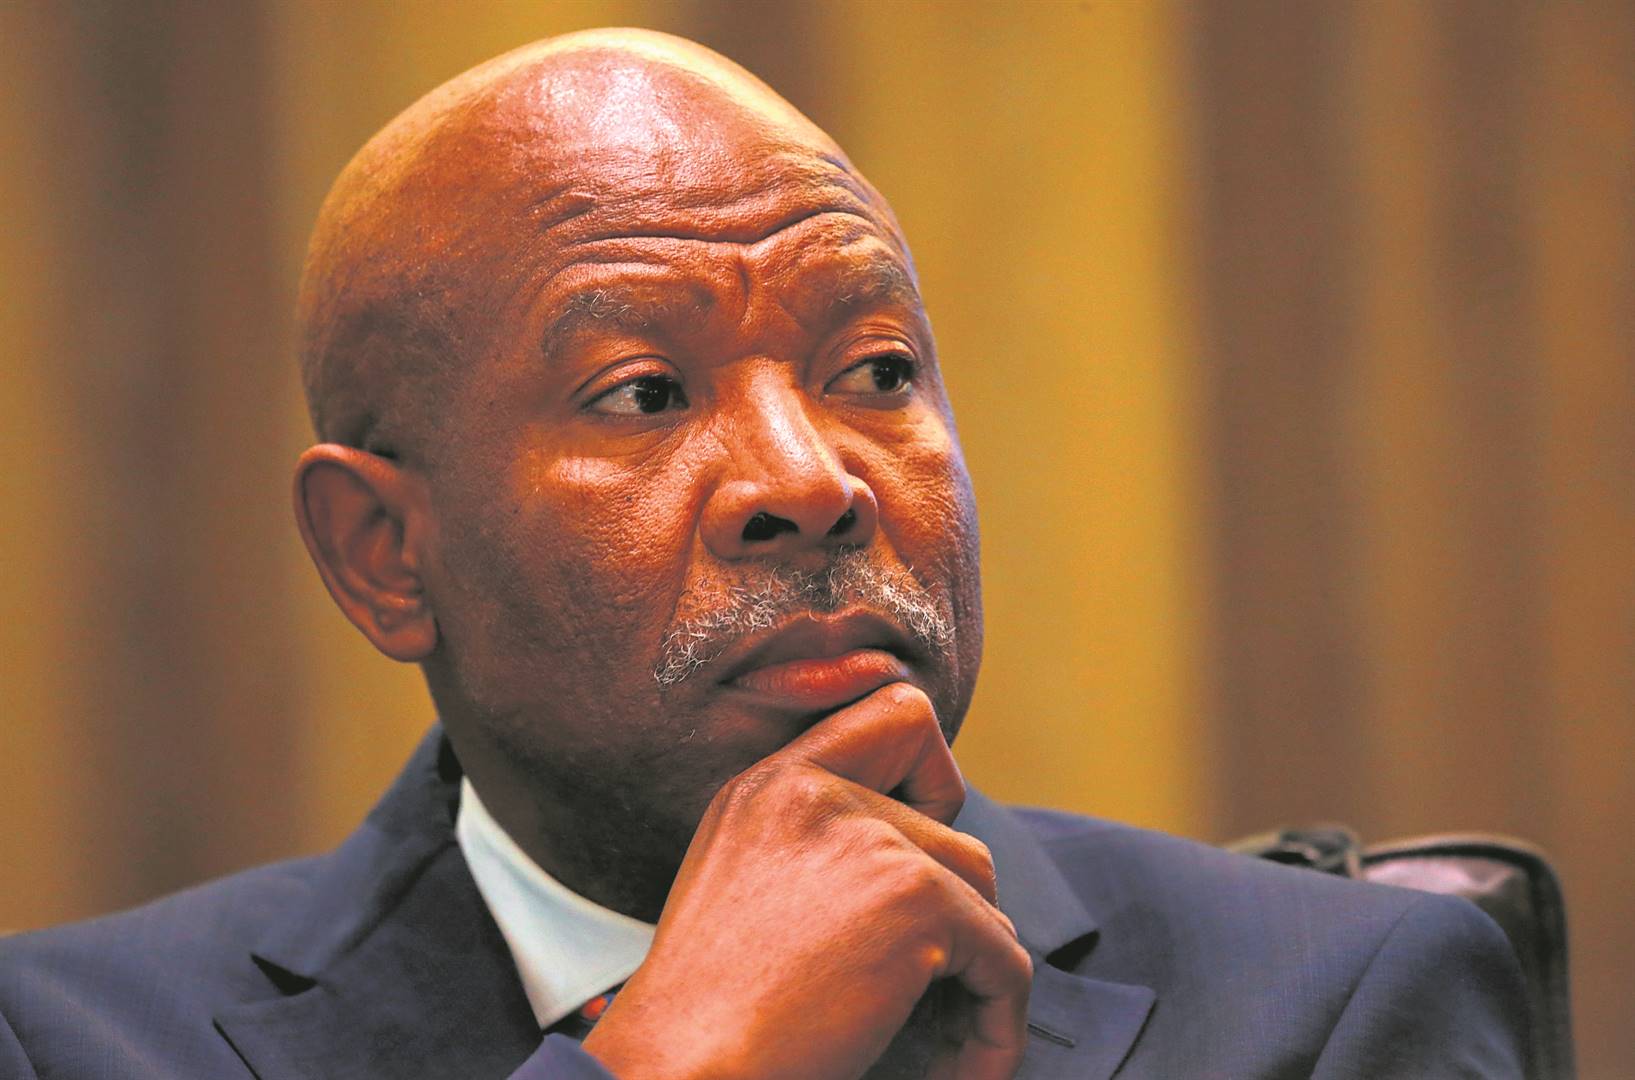 Reserve Bank Governor, Lesetja Kganyago, told the World Economic Forum that SA won't be the first mover in issuing retail central bank digital currency (CBDC).